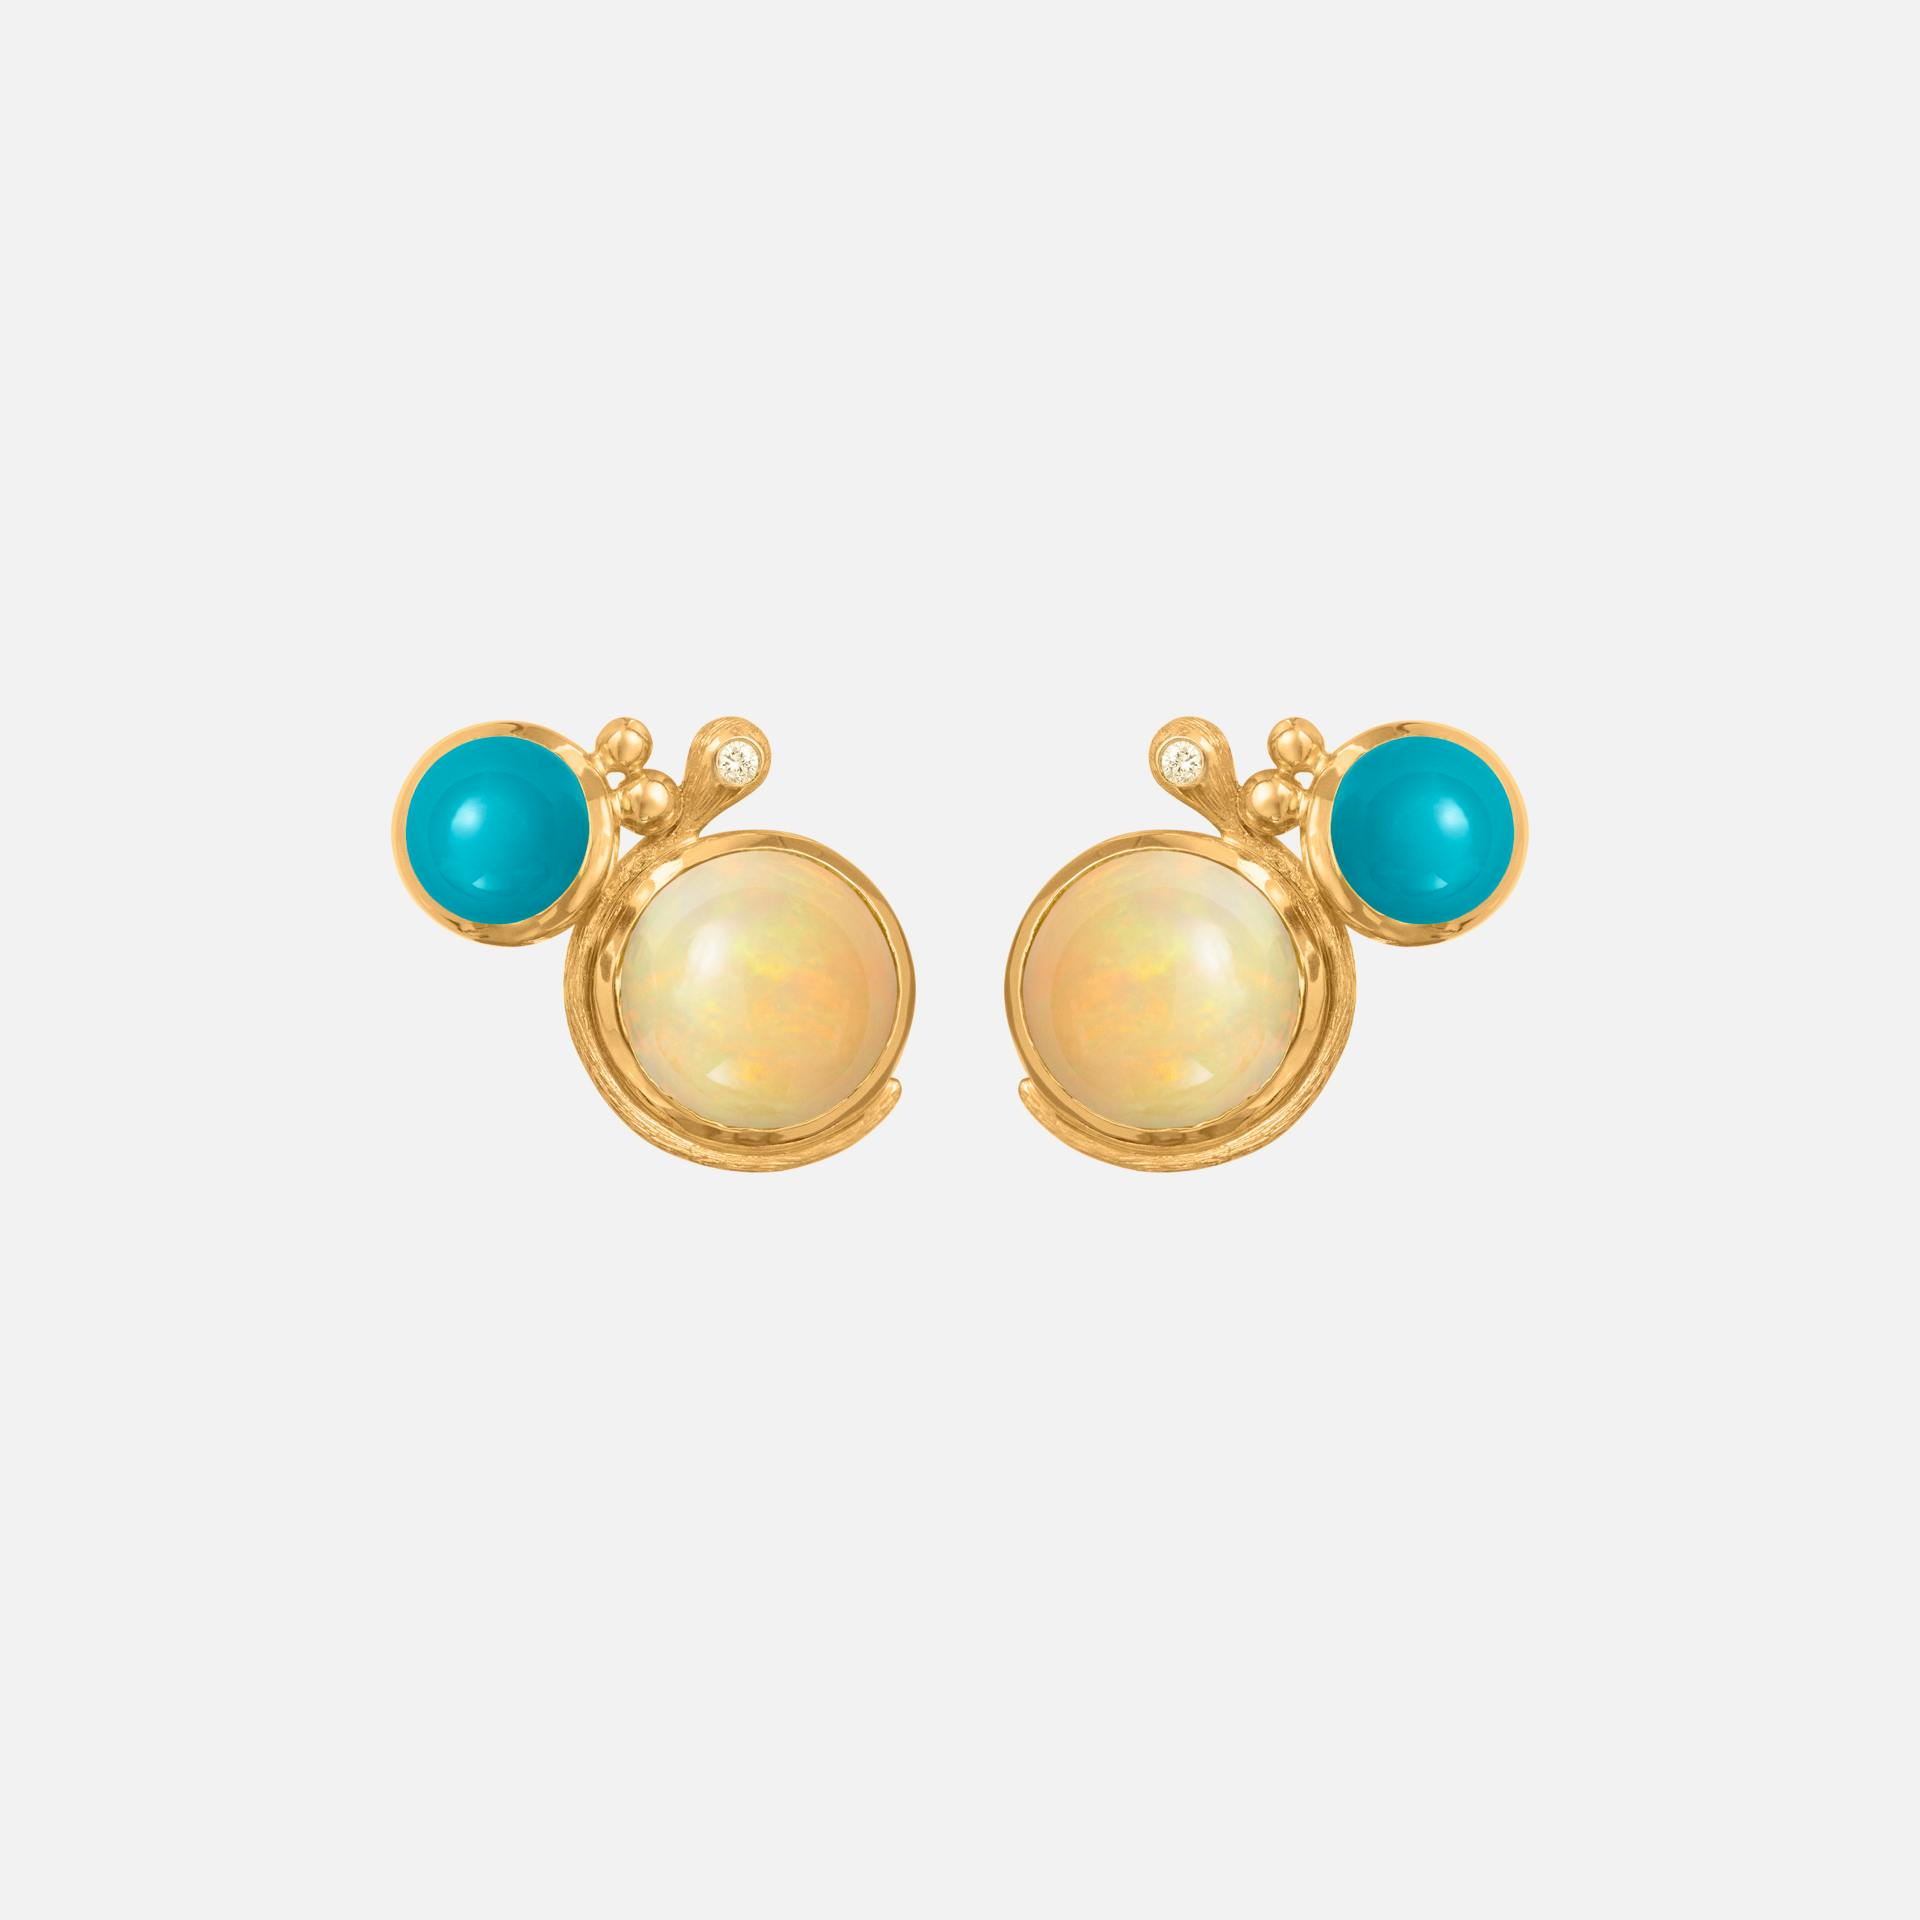 Lotus stud earrings 18k gold with turquoise and opal